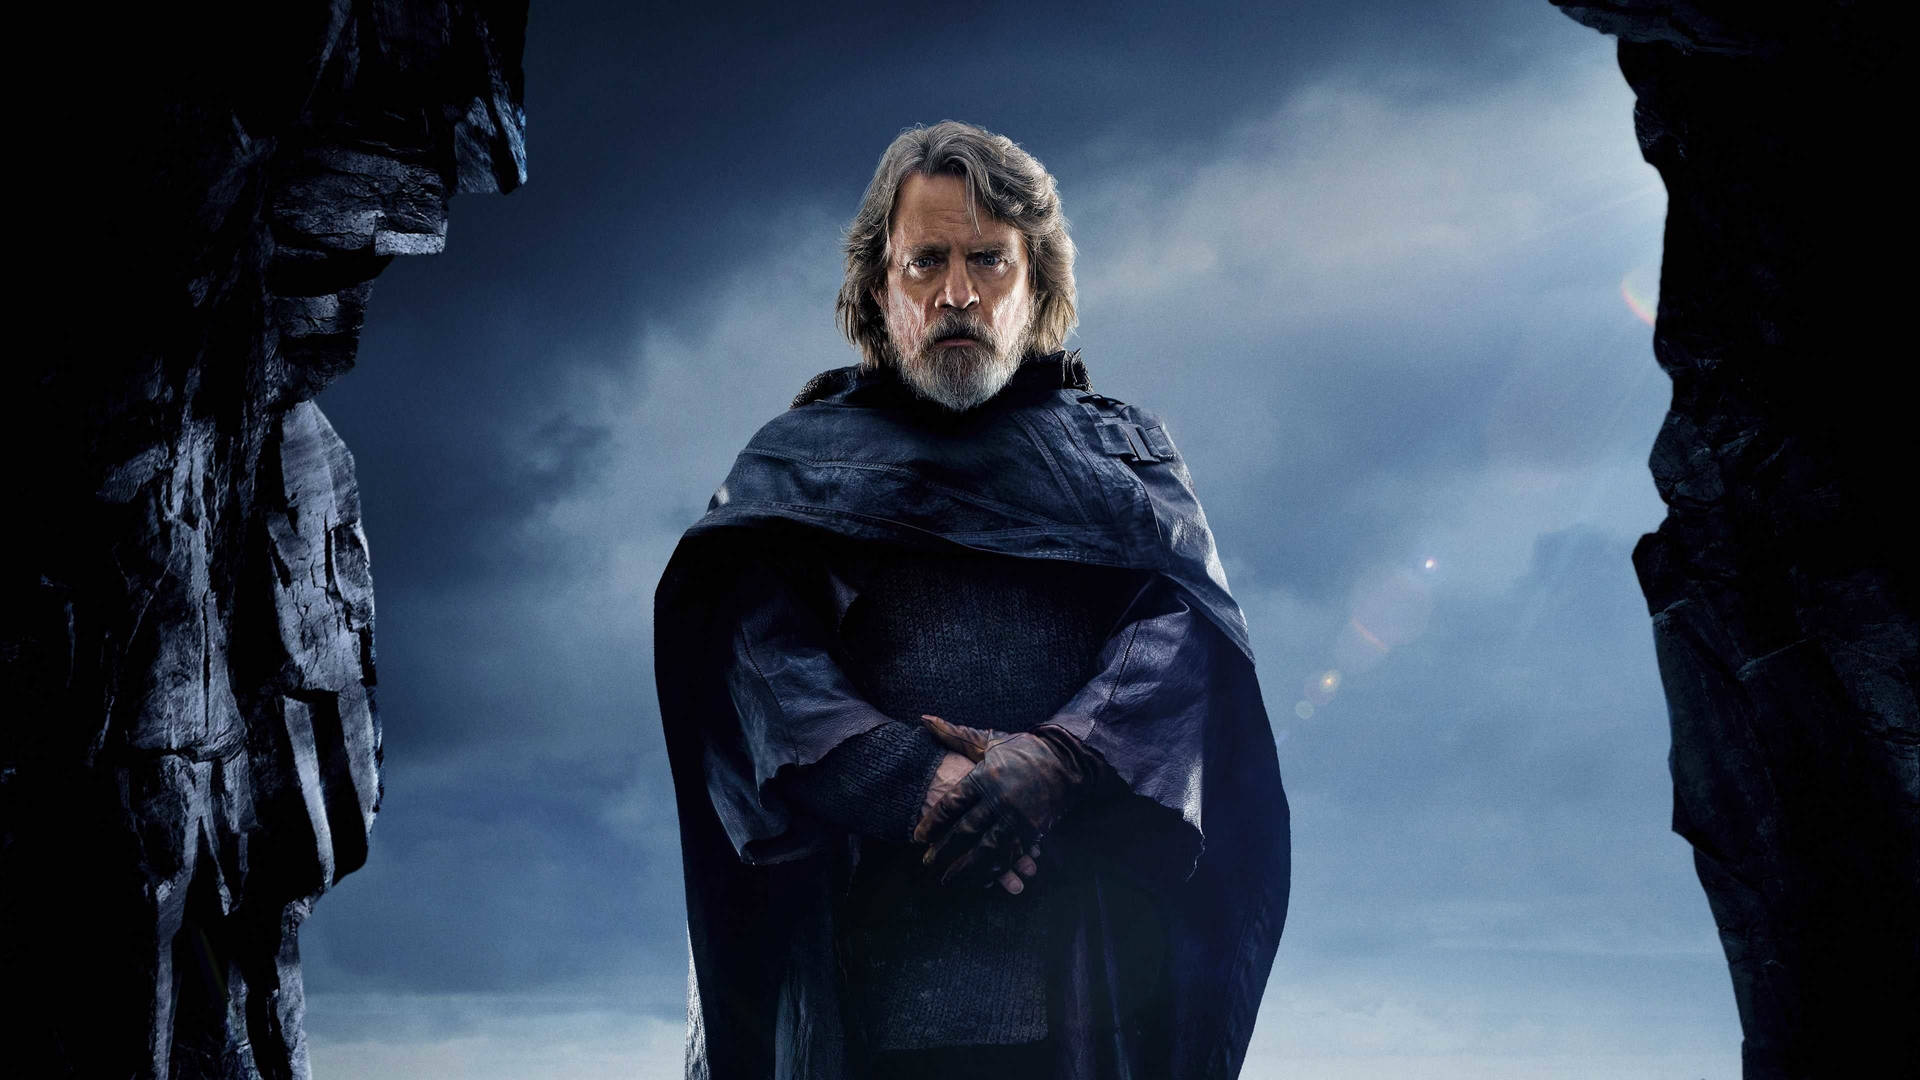 Luke Skywalker battles with The Dark Side of the Force in the epic space opera "Star Wars". Wallpaper